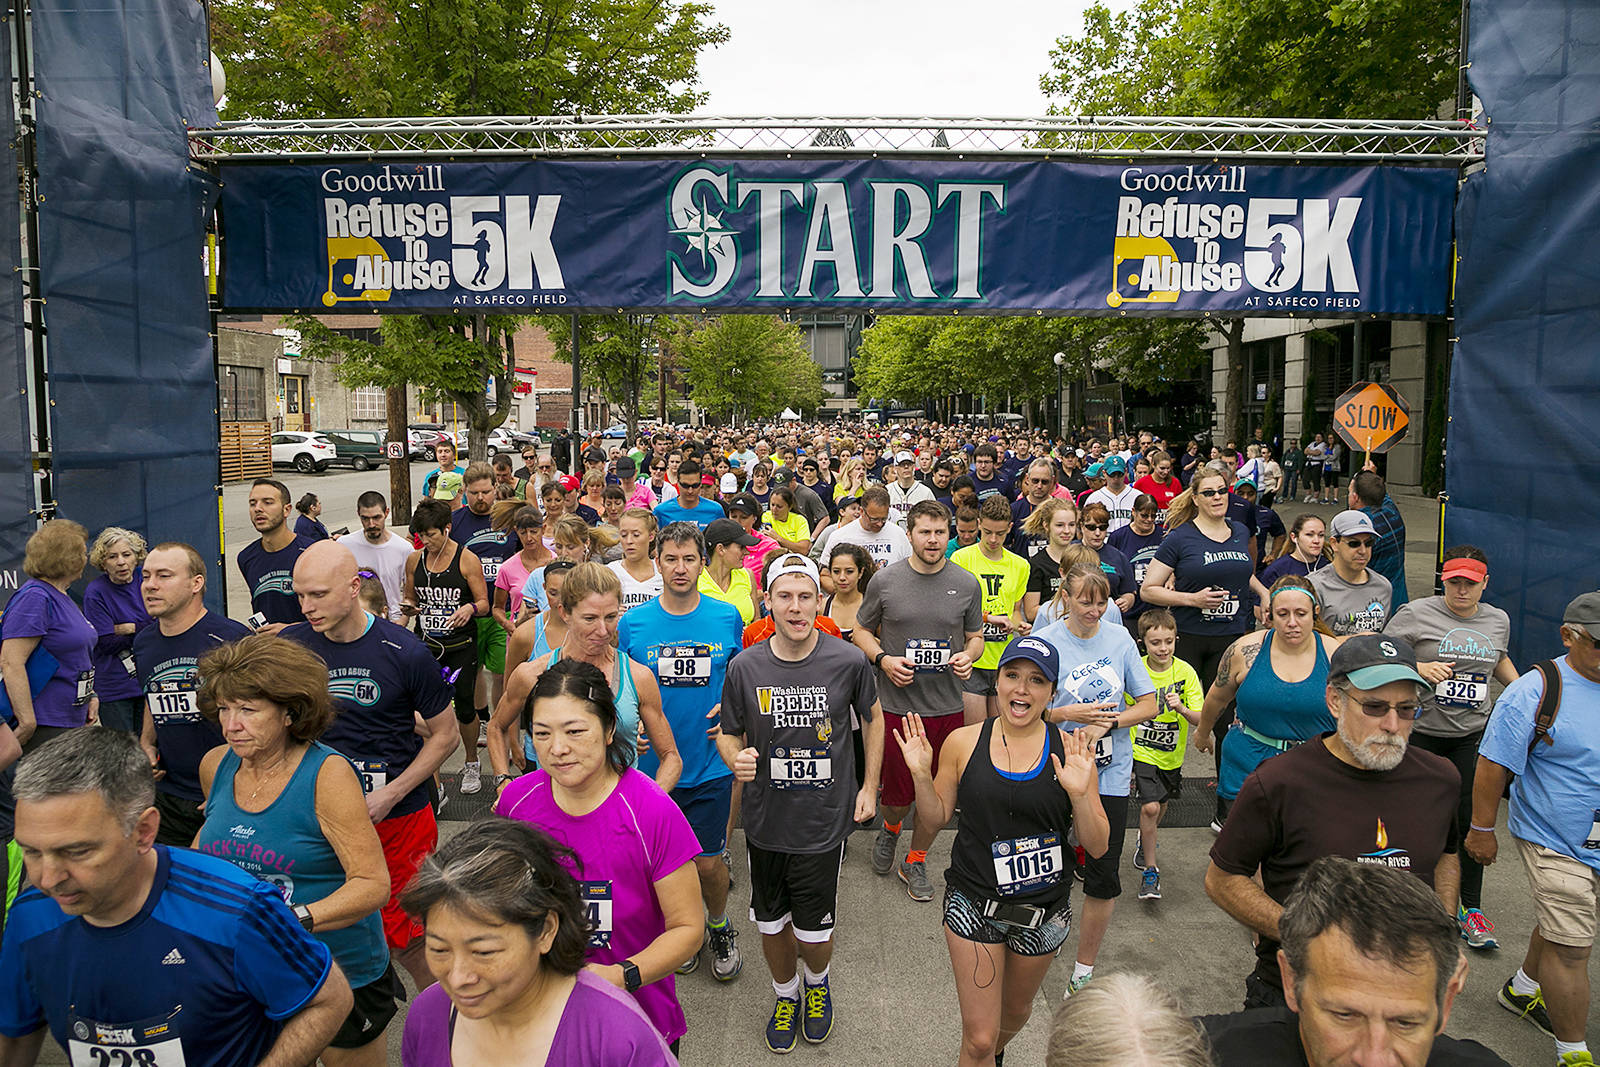 Join the July 21 Refuse To Abuse 5k, a joint event from the Seattle Mariners and the Washington State Coalition Against Domestic Violence.